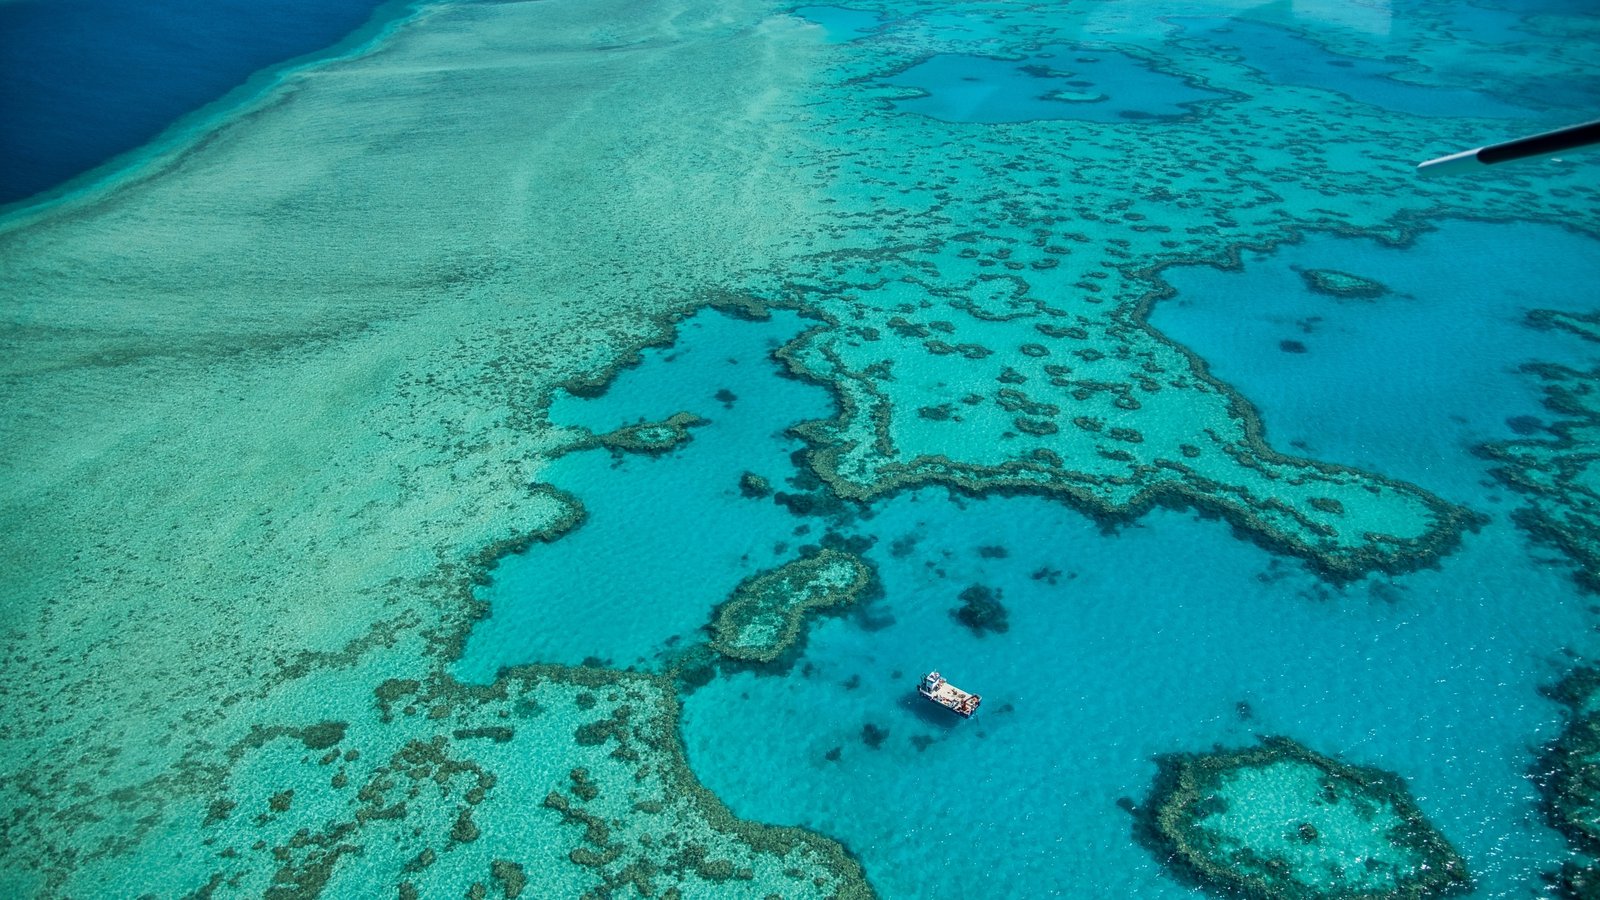 Billion Dollar Plan Aims To Protect Great Barrier Reef